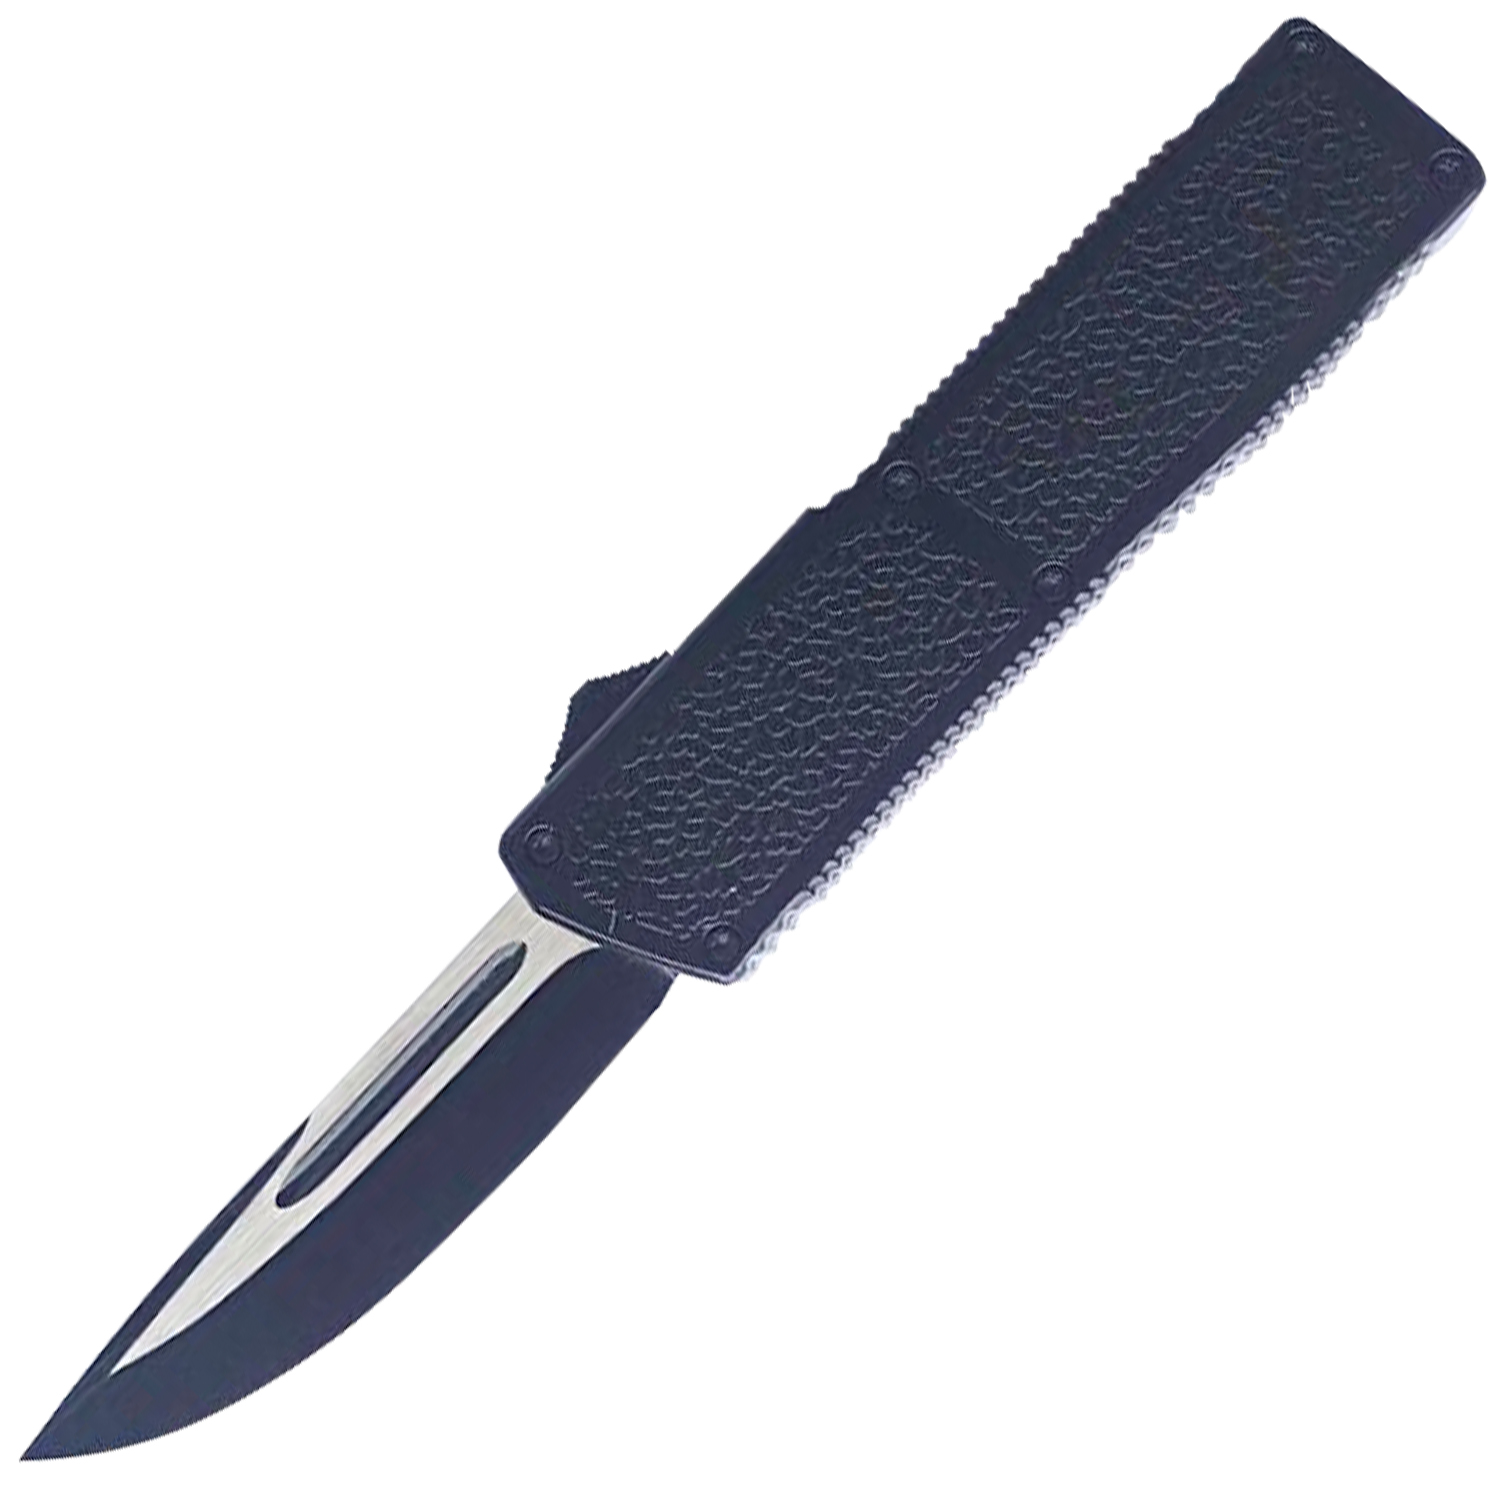 Lighting Action Assisted Knife Black Killa Drop Point Blade